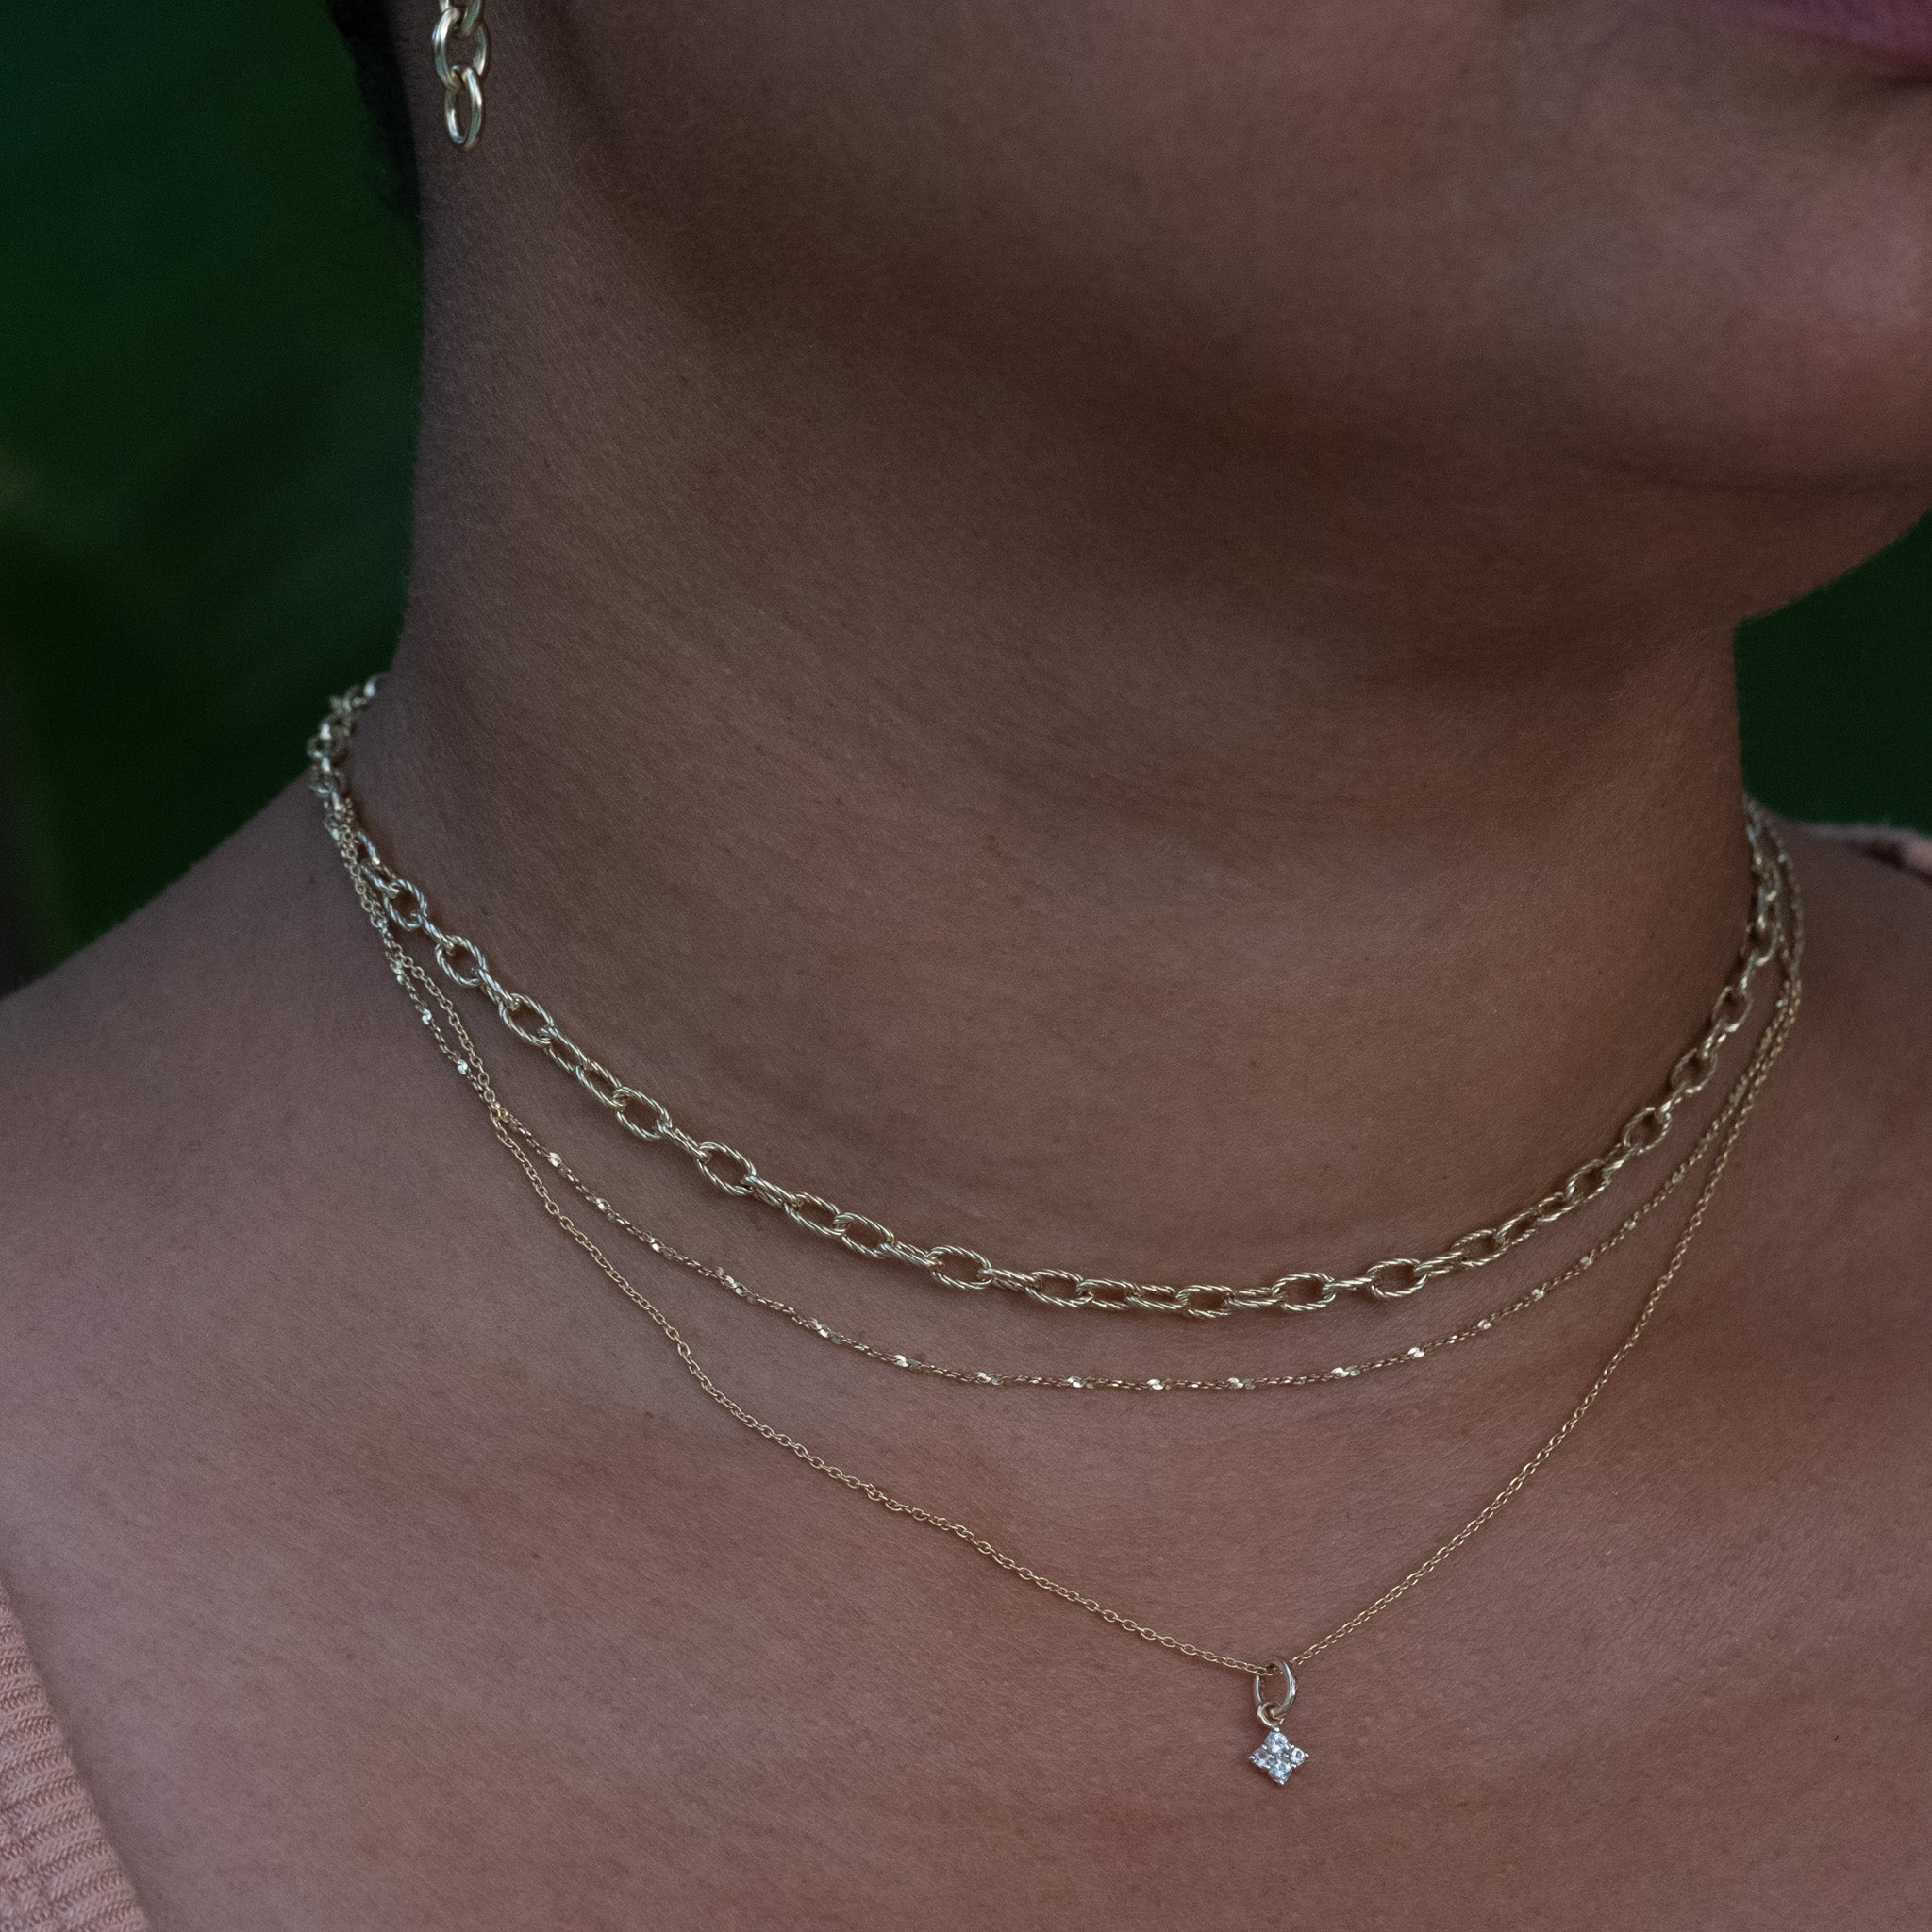 A close up of a woman wearing the Aiden Jae Starshine Chain Necklace.